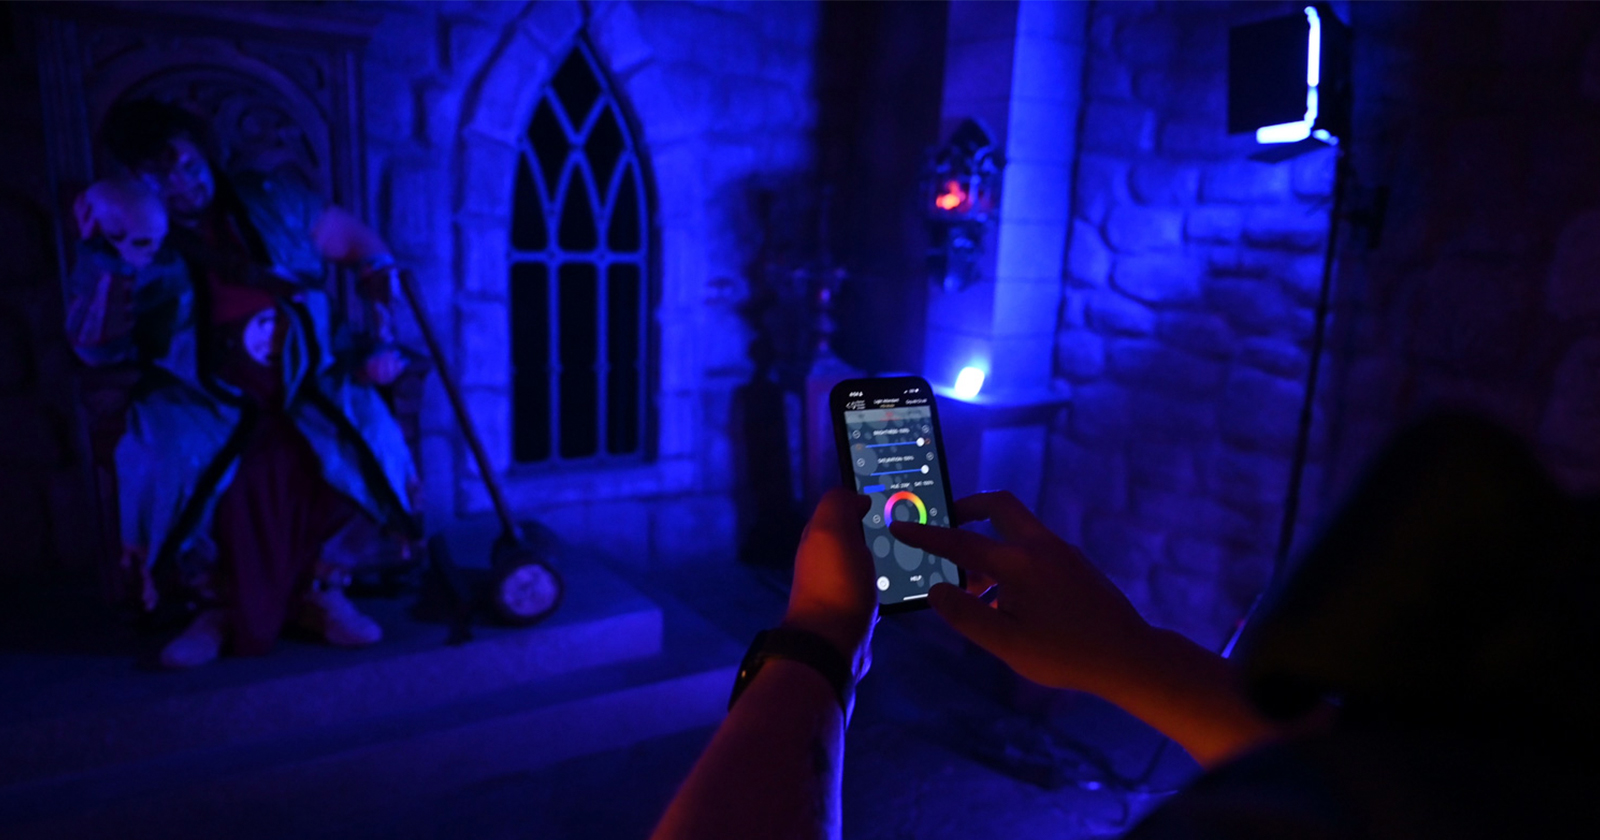 FEATURE – Promaster Light Attendant App Takes The Guess Work Out of Lighting On Set